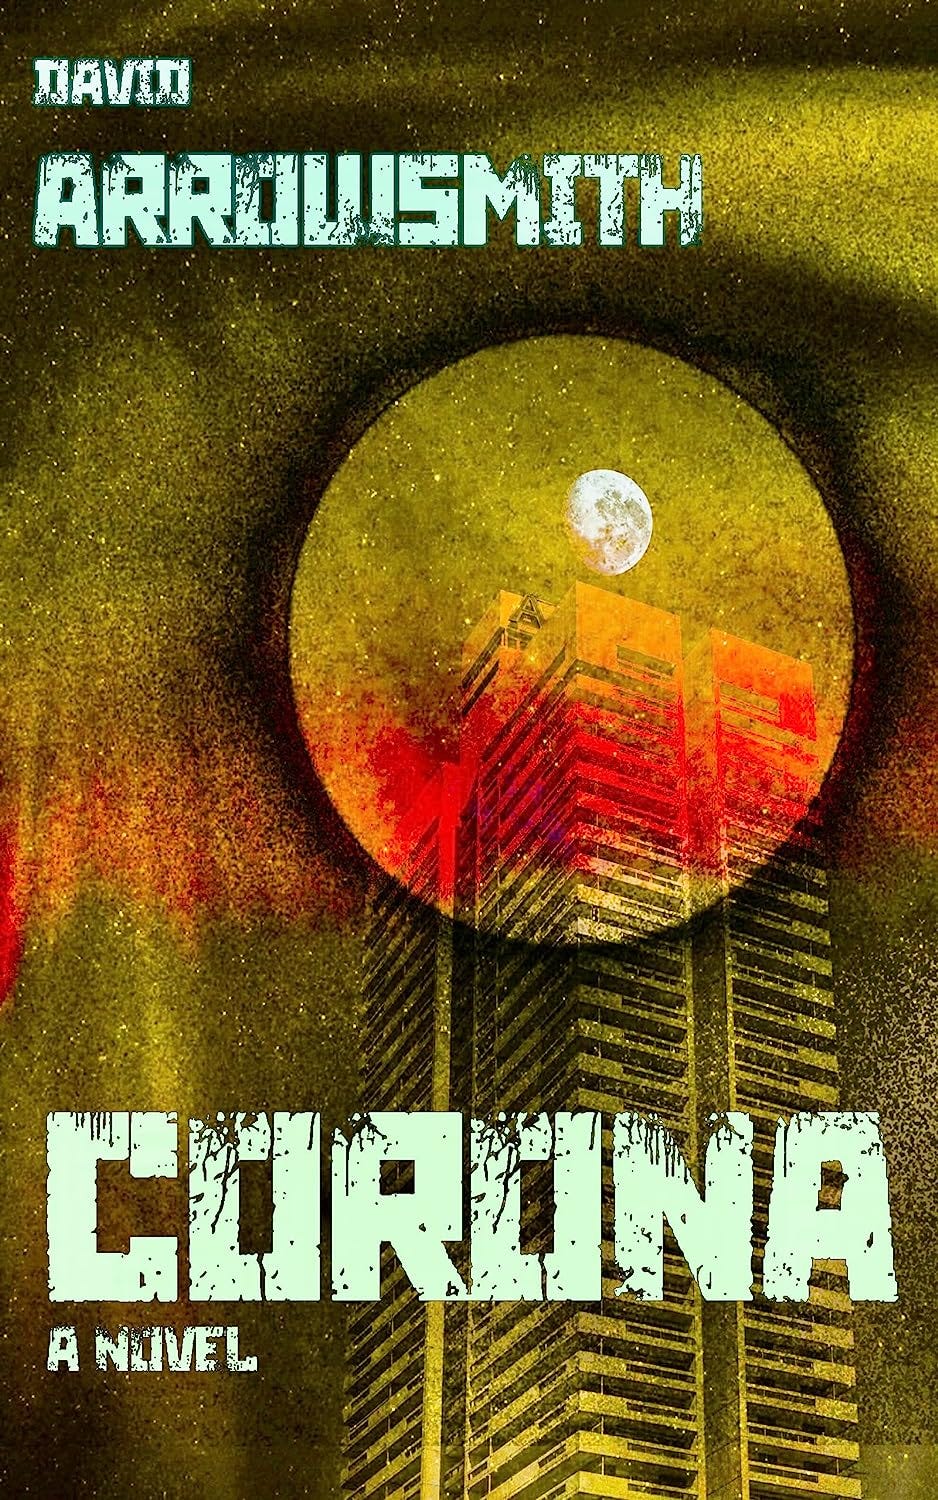 Book cover of Corona by David Arrowsmith, showing a high rise building and polluted sky.